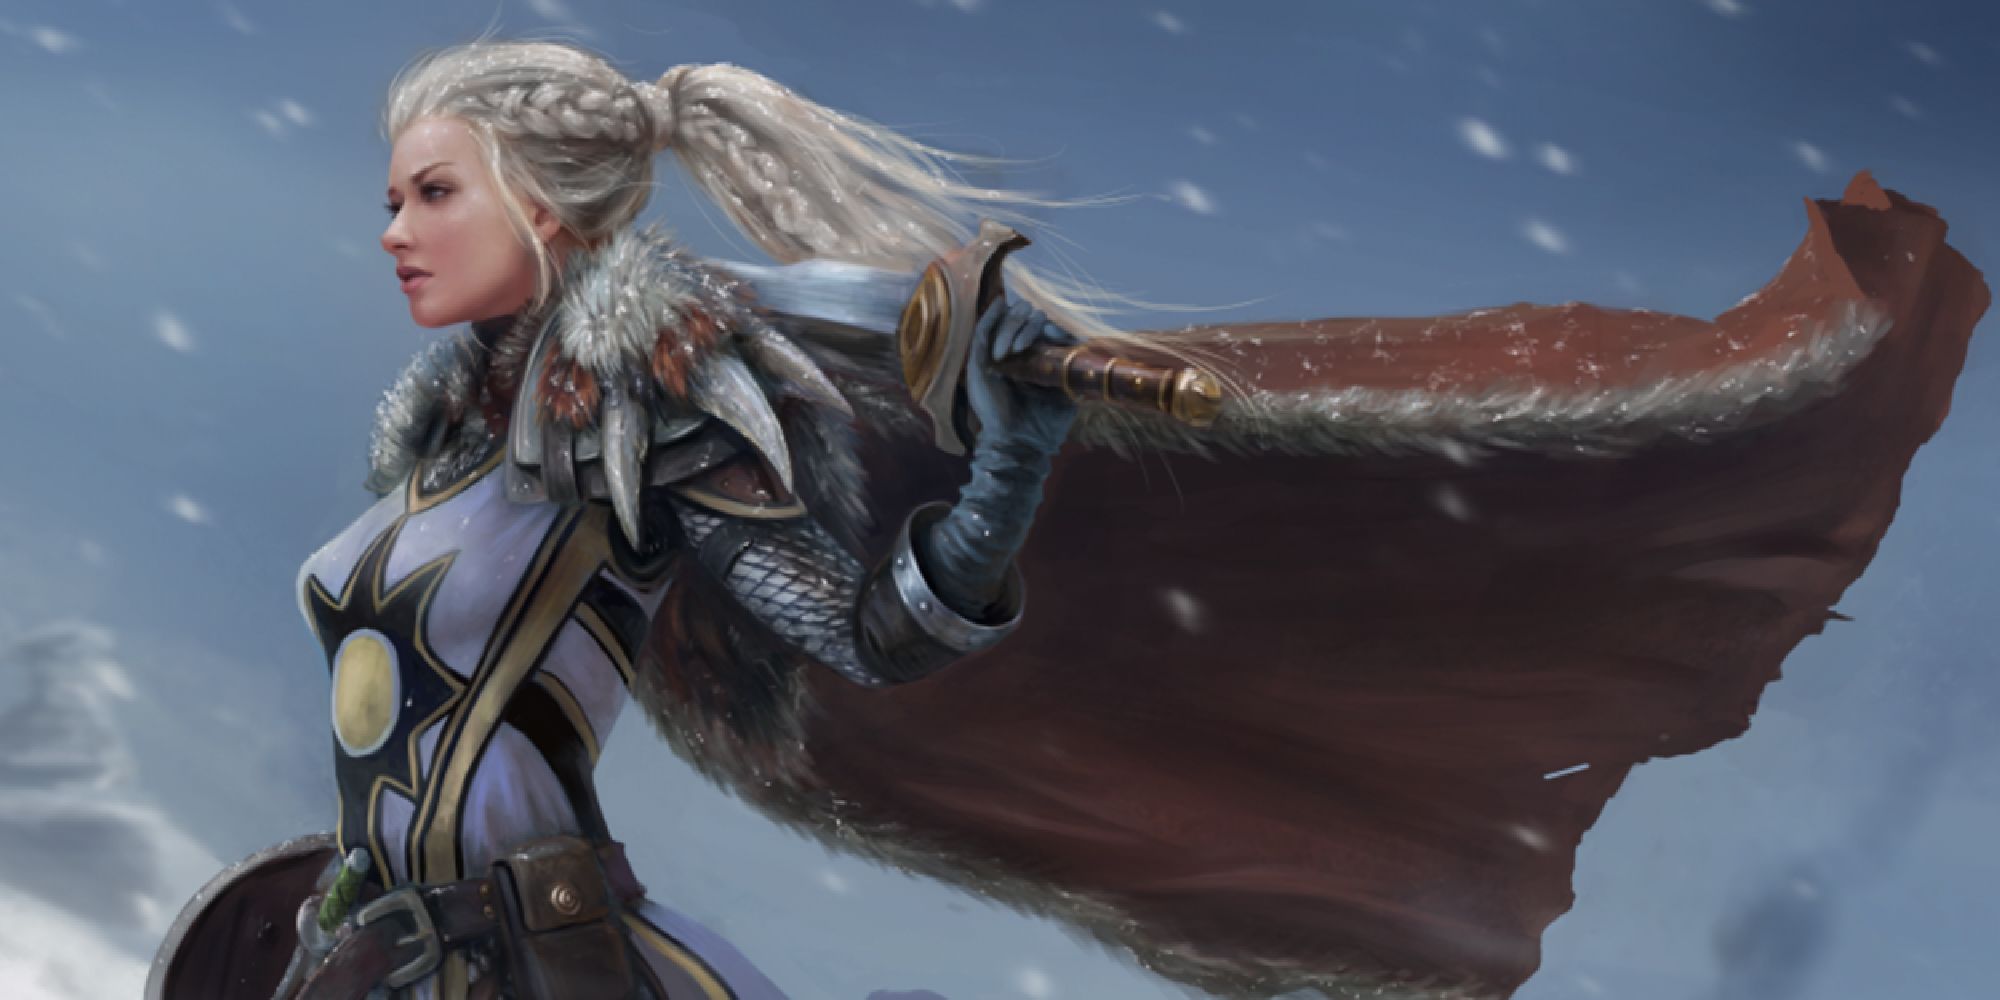 The legendary D&D character Dove Falconhand in a snowy tundra, blonde hair and cloak blowing in the breeze, Adventures of the Sworfd Coast official art